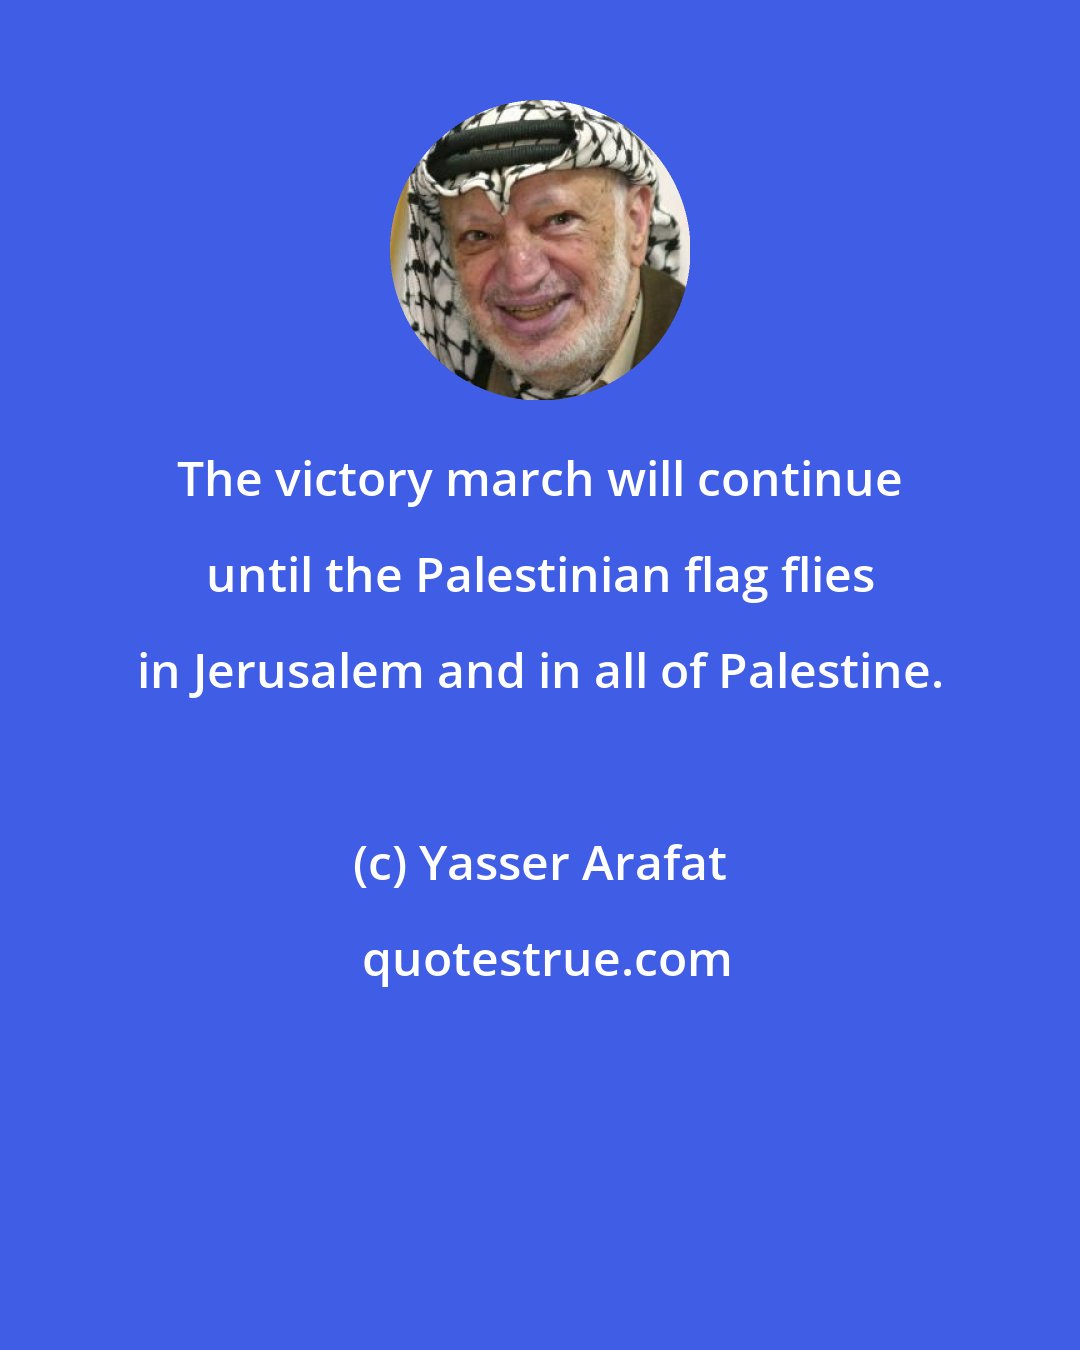 Yasser Arafat: The victory march will continue until the Palestinian flag flies in Jerusalem and in all of Palestine.